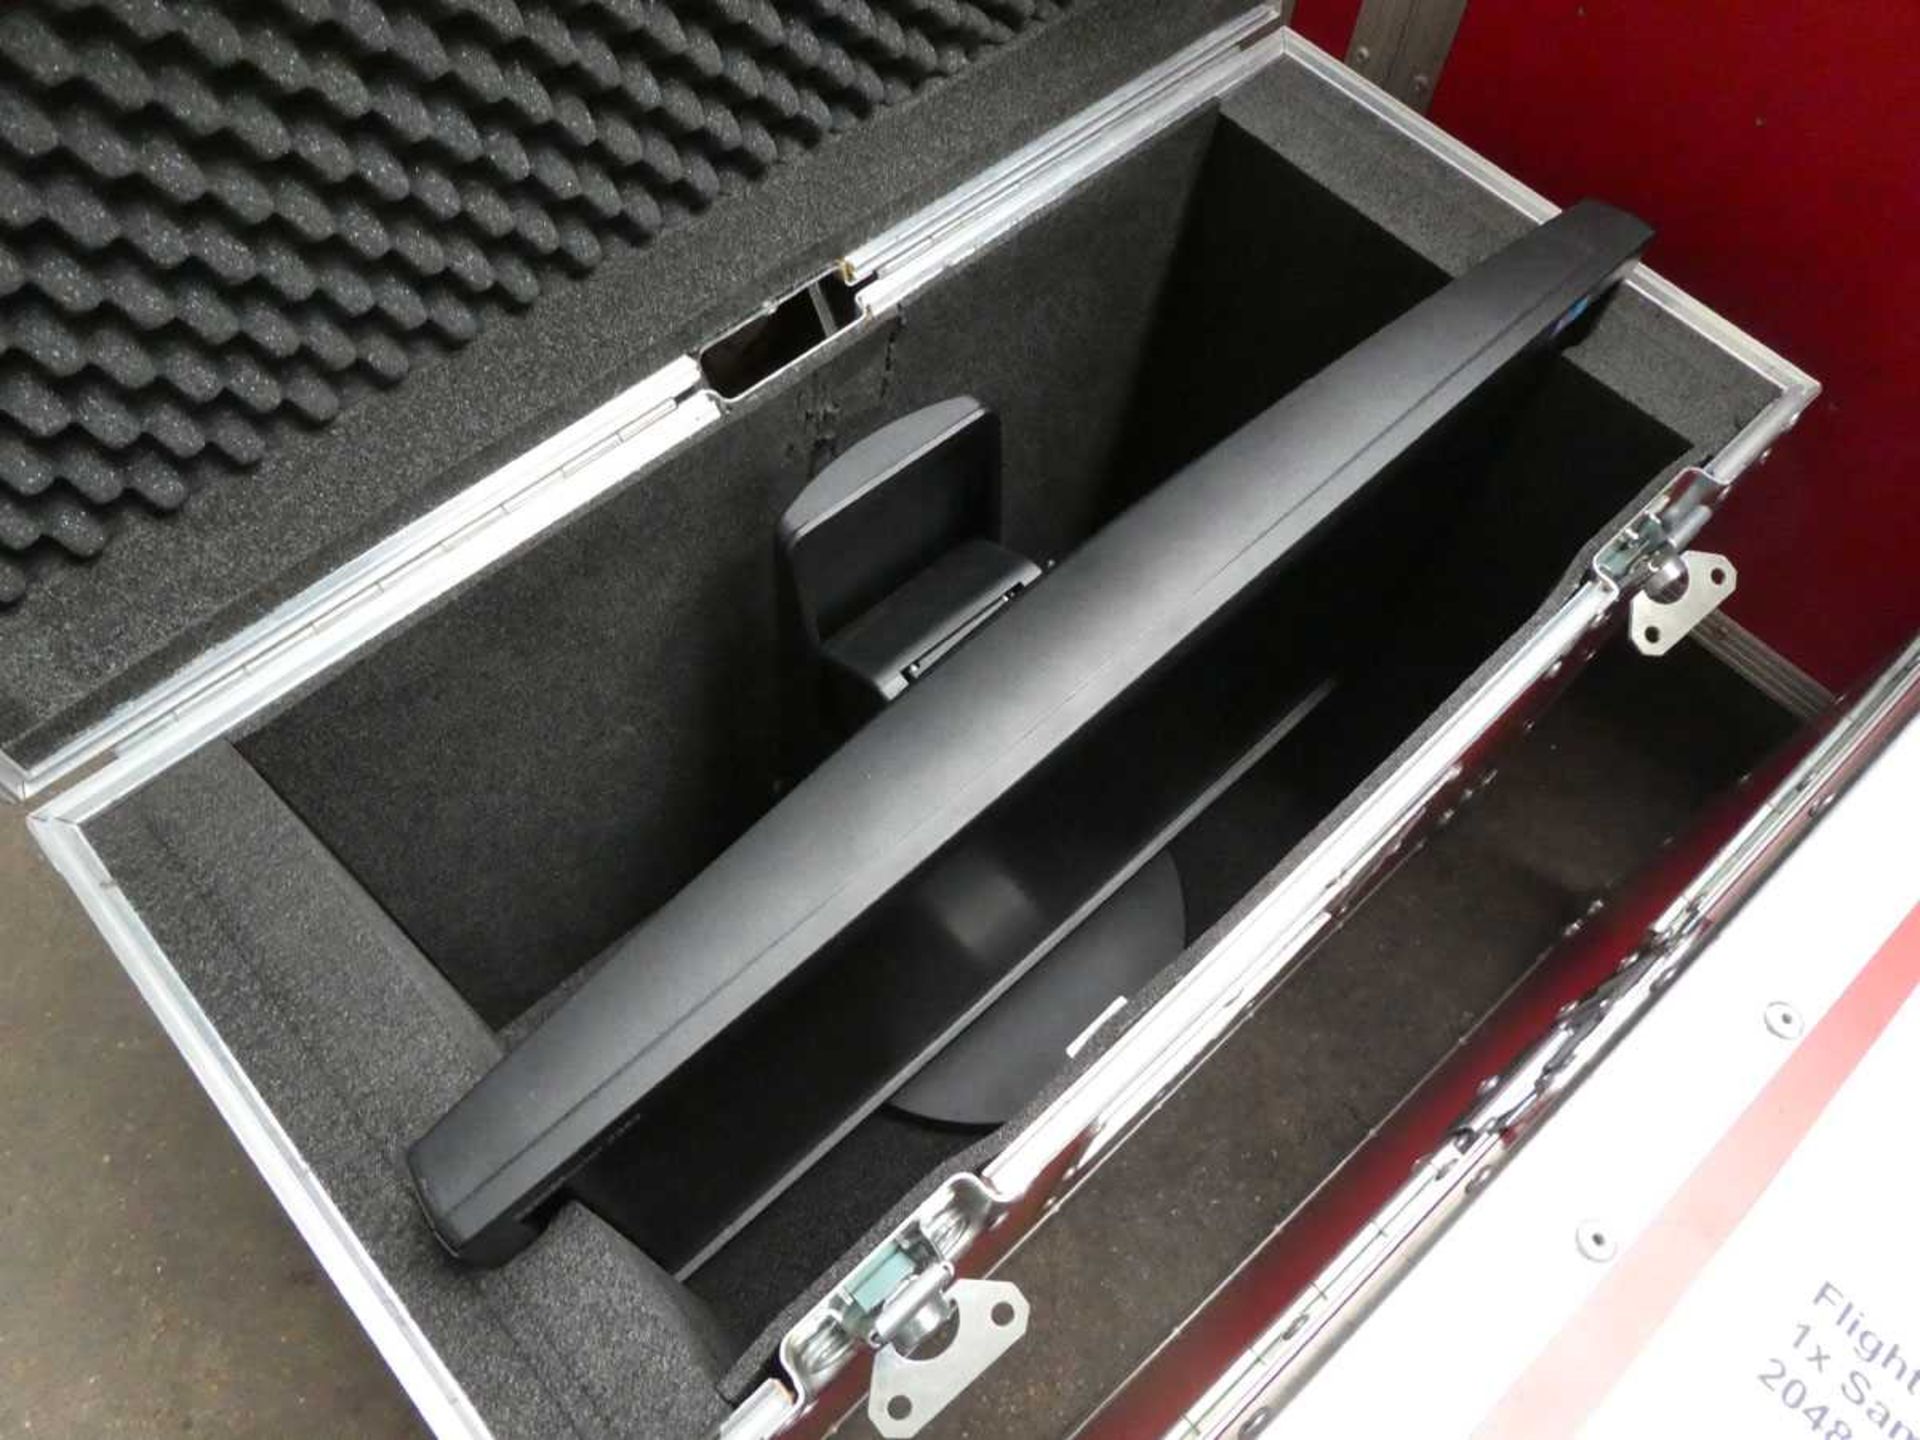 +VAT Red flight case containing Samsung 23" LCD monitor - Image 3 of 3